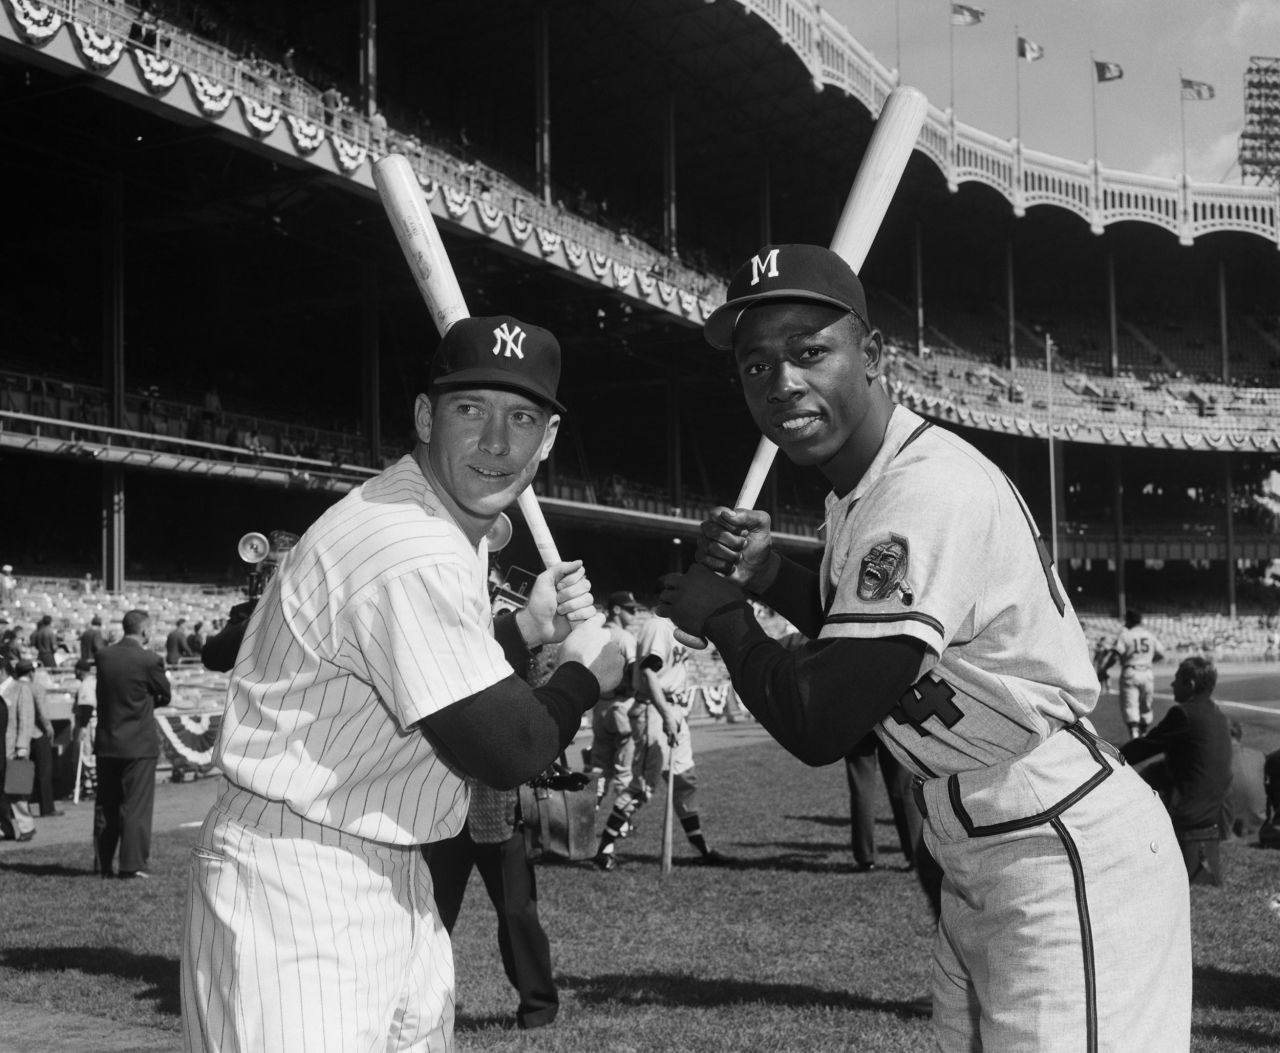 Aaron poses with New York Yankees slugger Mickey Mantle in 1957. That season, Aaron was named the National League's Most Valuable Player and his team defeated the Yankees to win the World Series. 